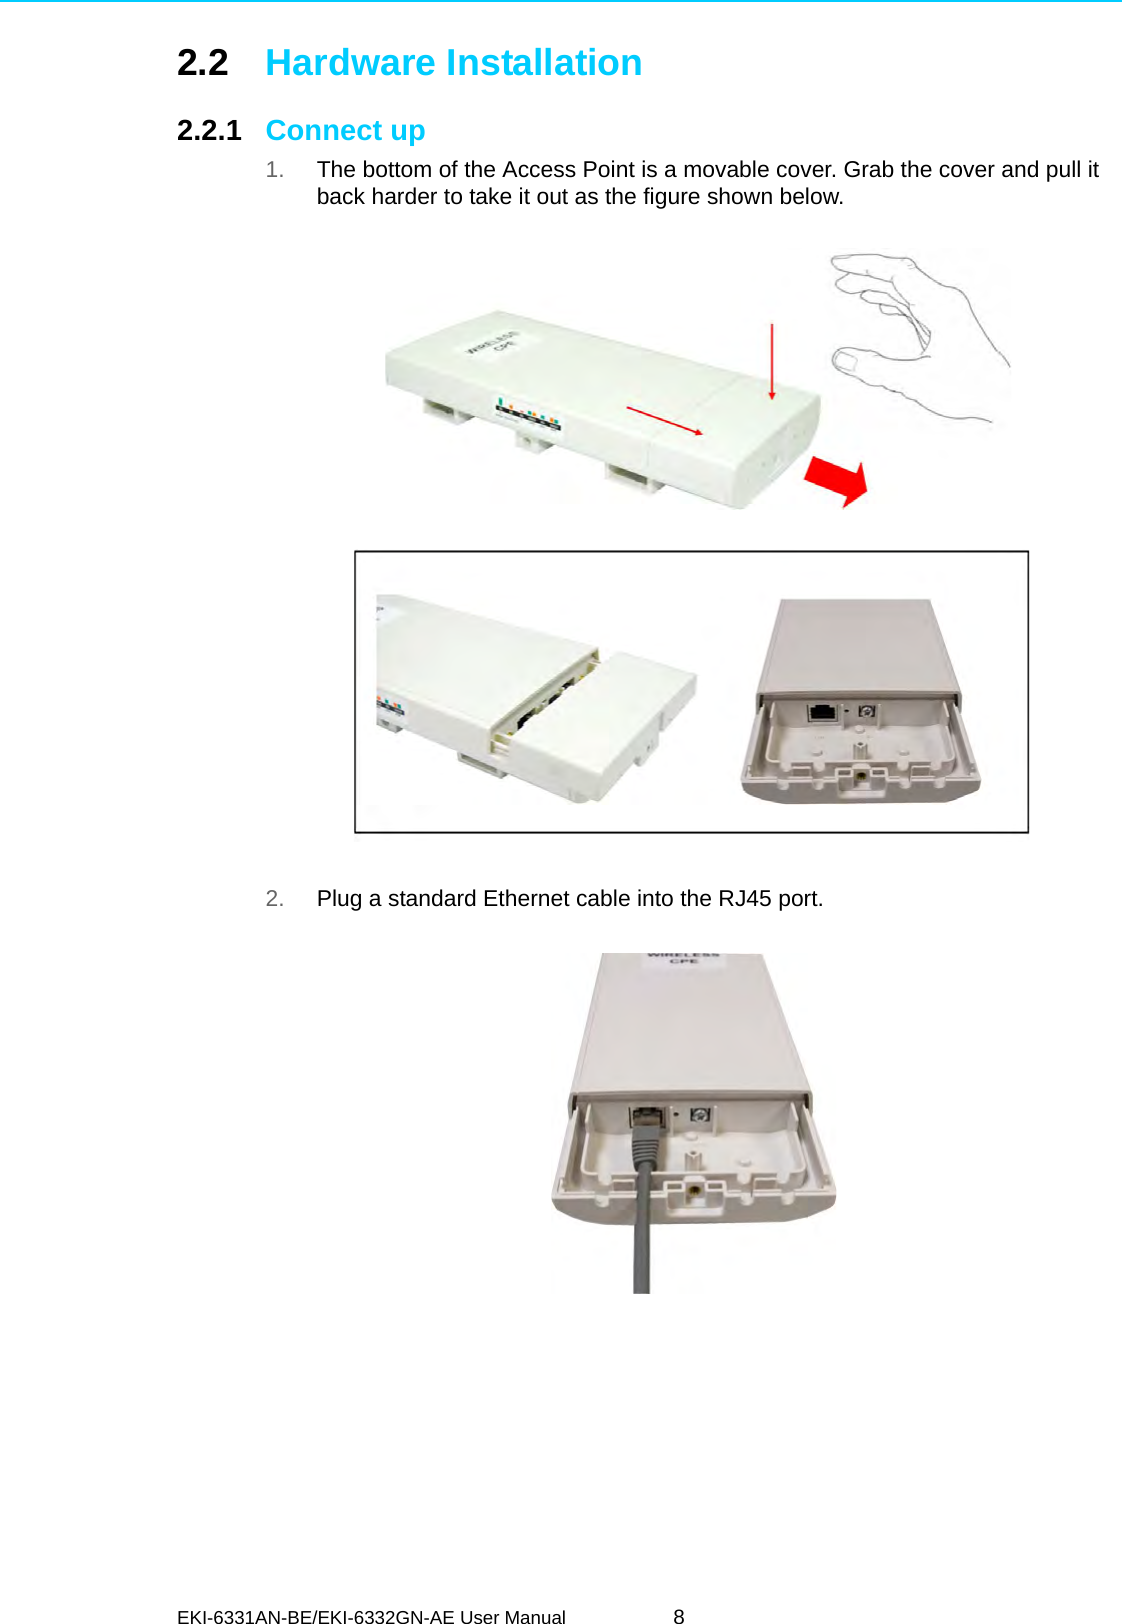 EKI-6331AN-BE/EKI-6332GN-AE User Manual 82.2 Hardware Installation2.2.1 Connect up1. The bottom of the Access Point is a movable cover. Grab the cover and pull it back harder to take it out as the figure shown below.  2. Plug a standard Ethernet cable into the RJ45 port.